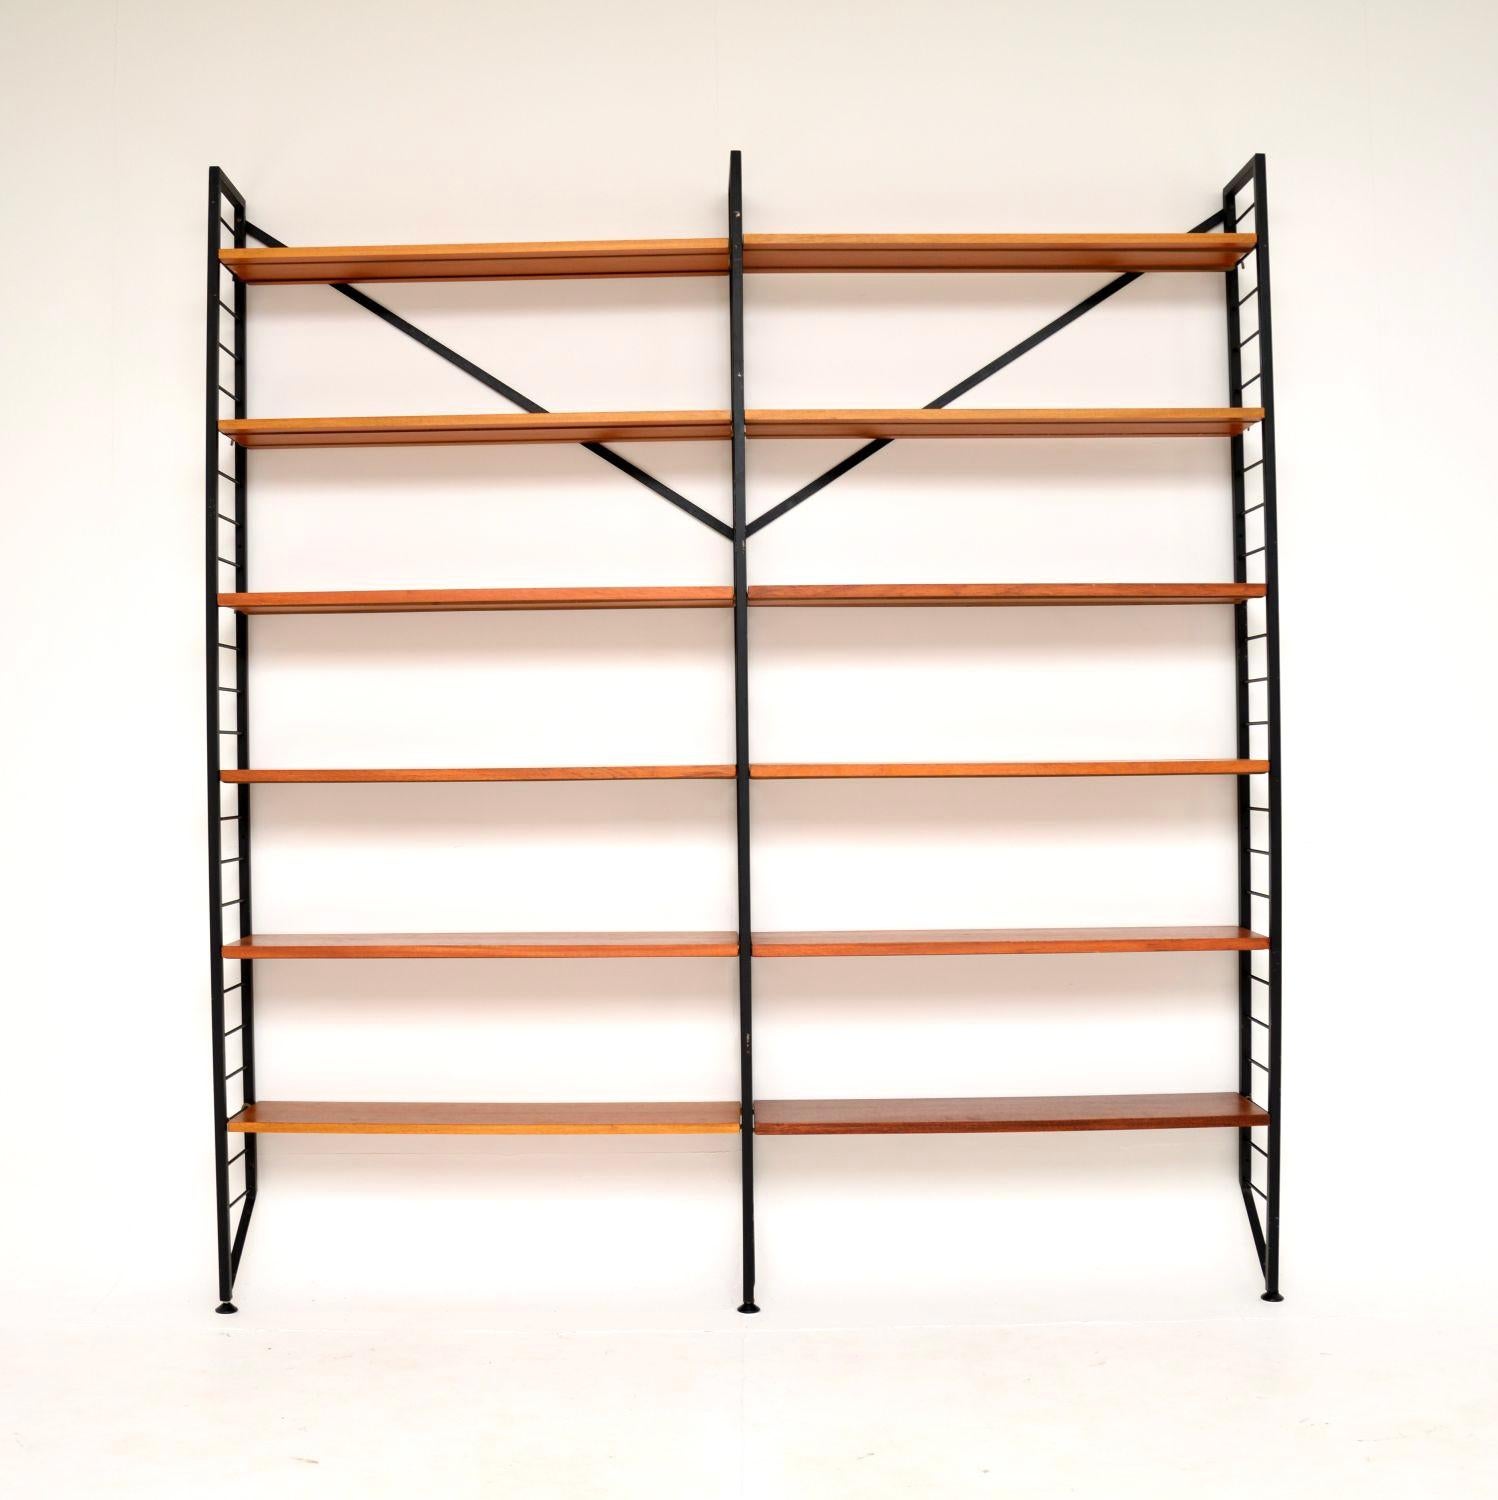 A very stylish and practical vintage shelving unit in teak by ladderax. This was made in England, it dates from the 1960’s.

This is a clever and iconic design, the ladderax units were made by Staples and were designed to be extremely flexible, self